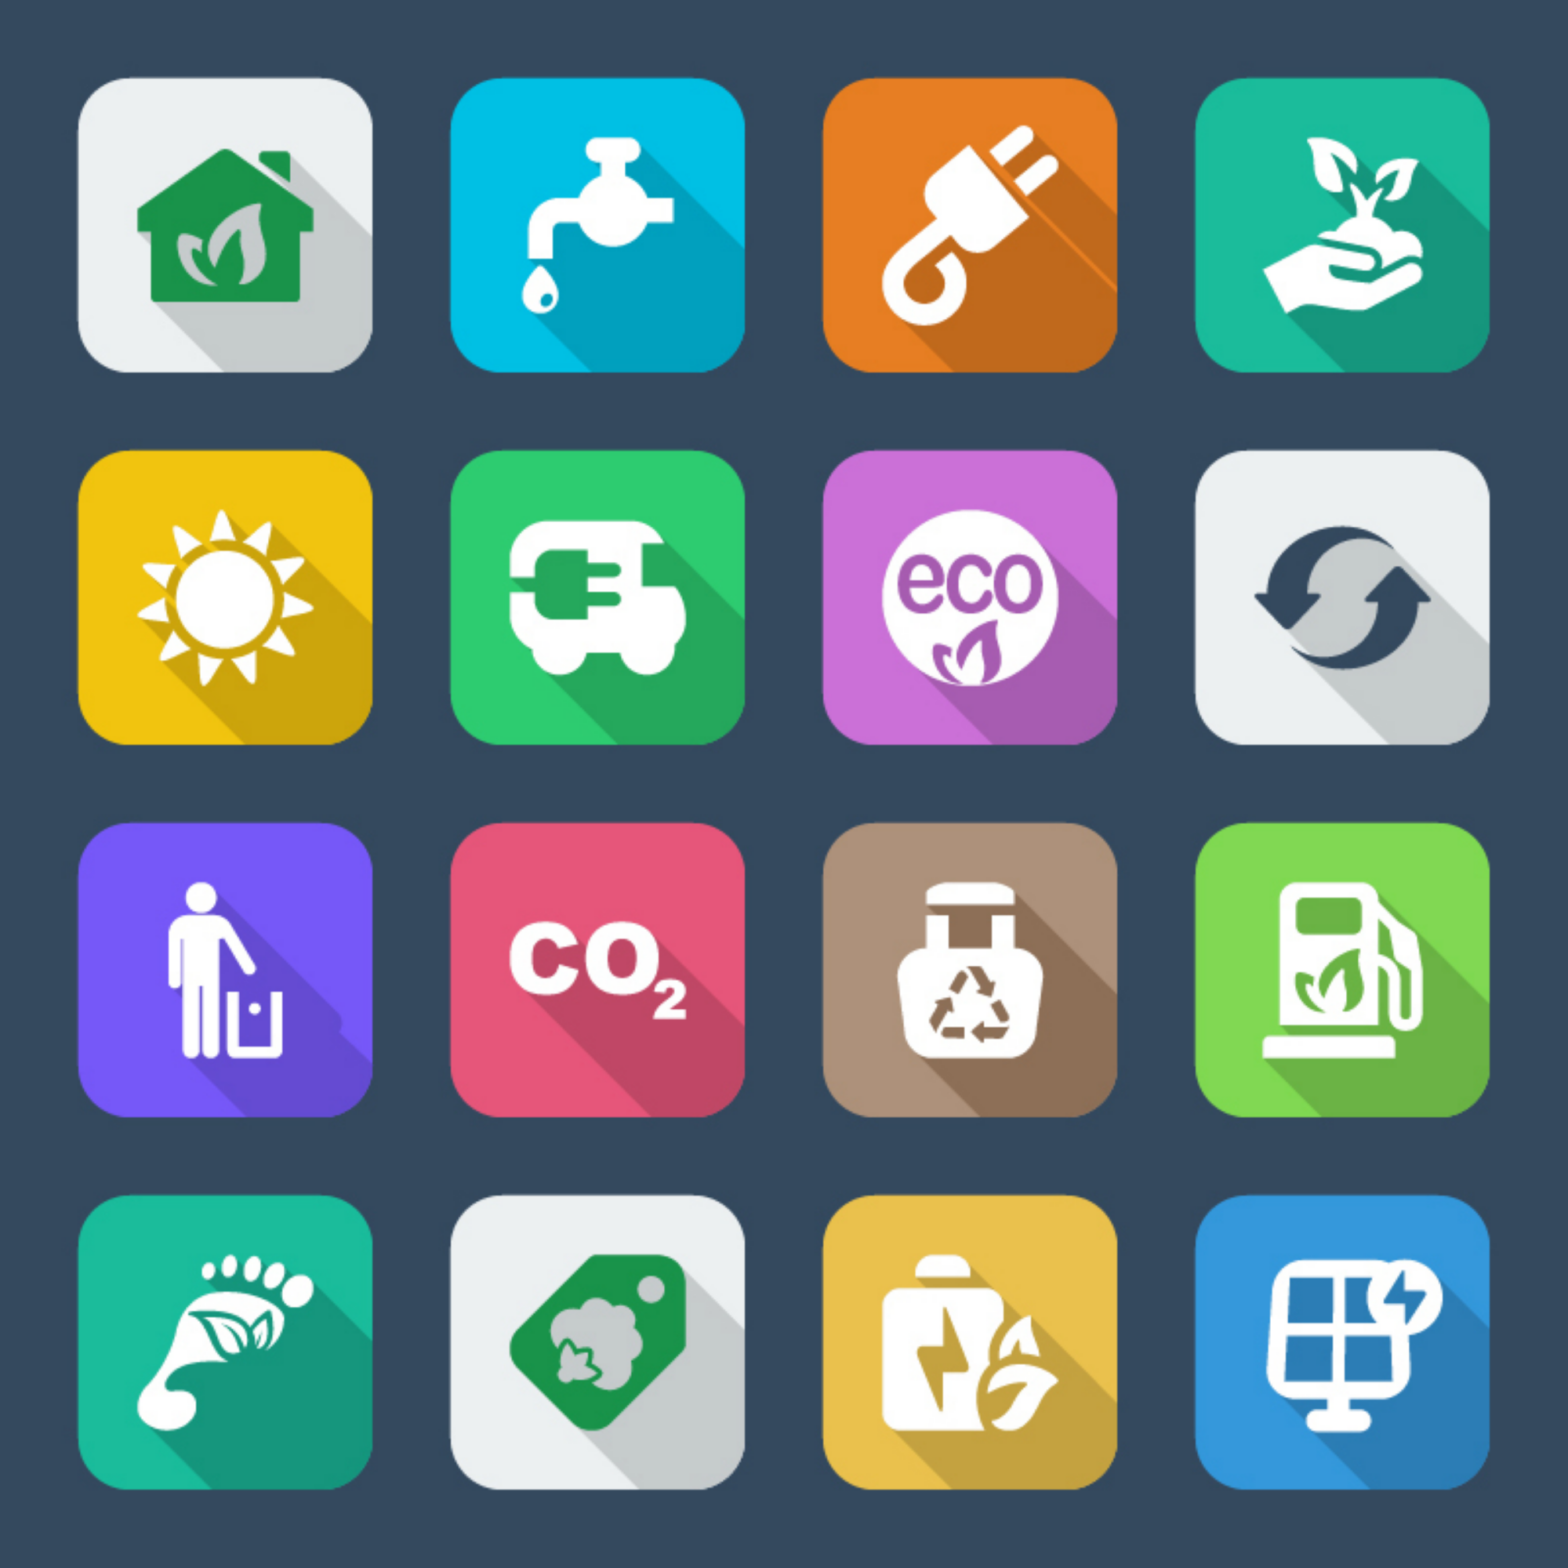 A collection of symbols for visual signposting of sustainability categories - Image from Shutterstock